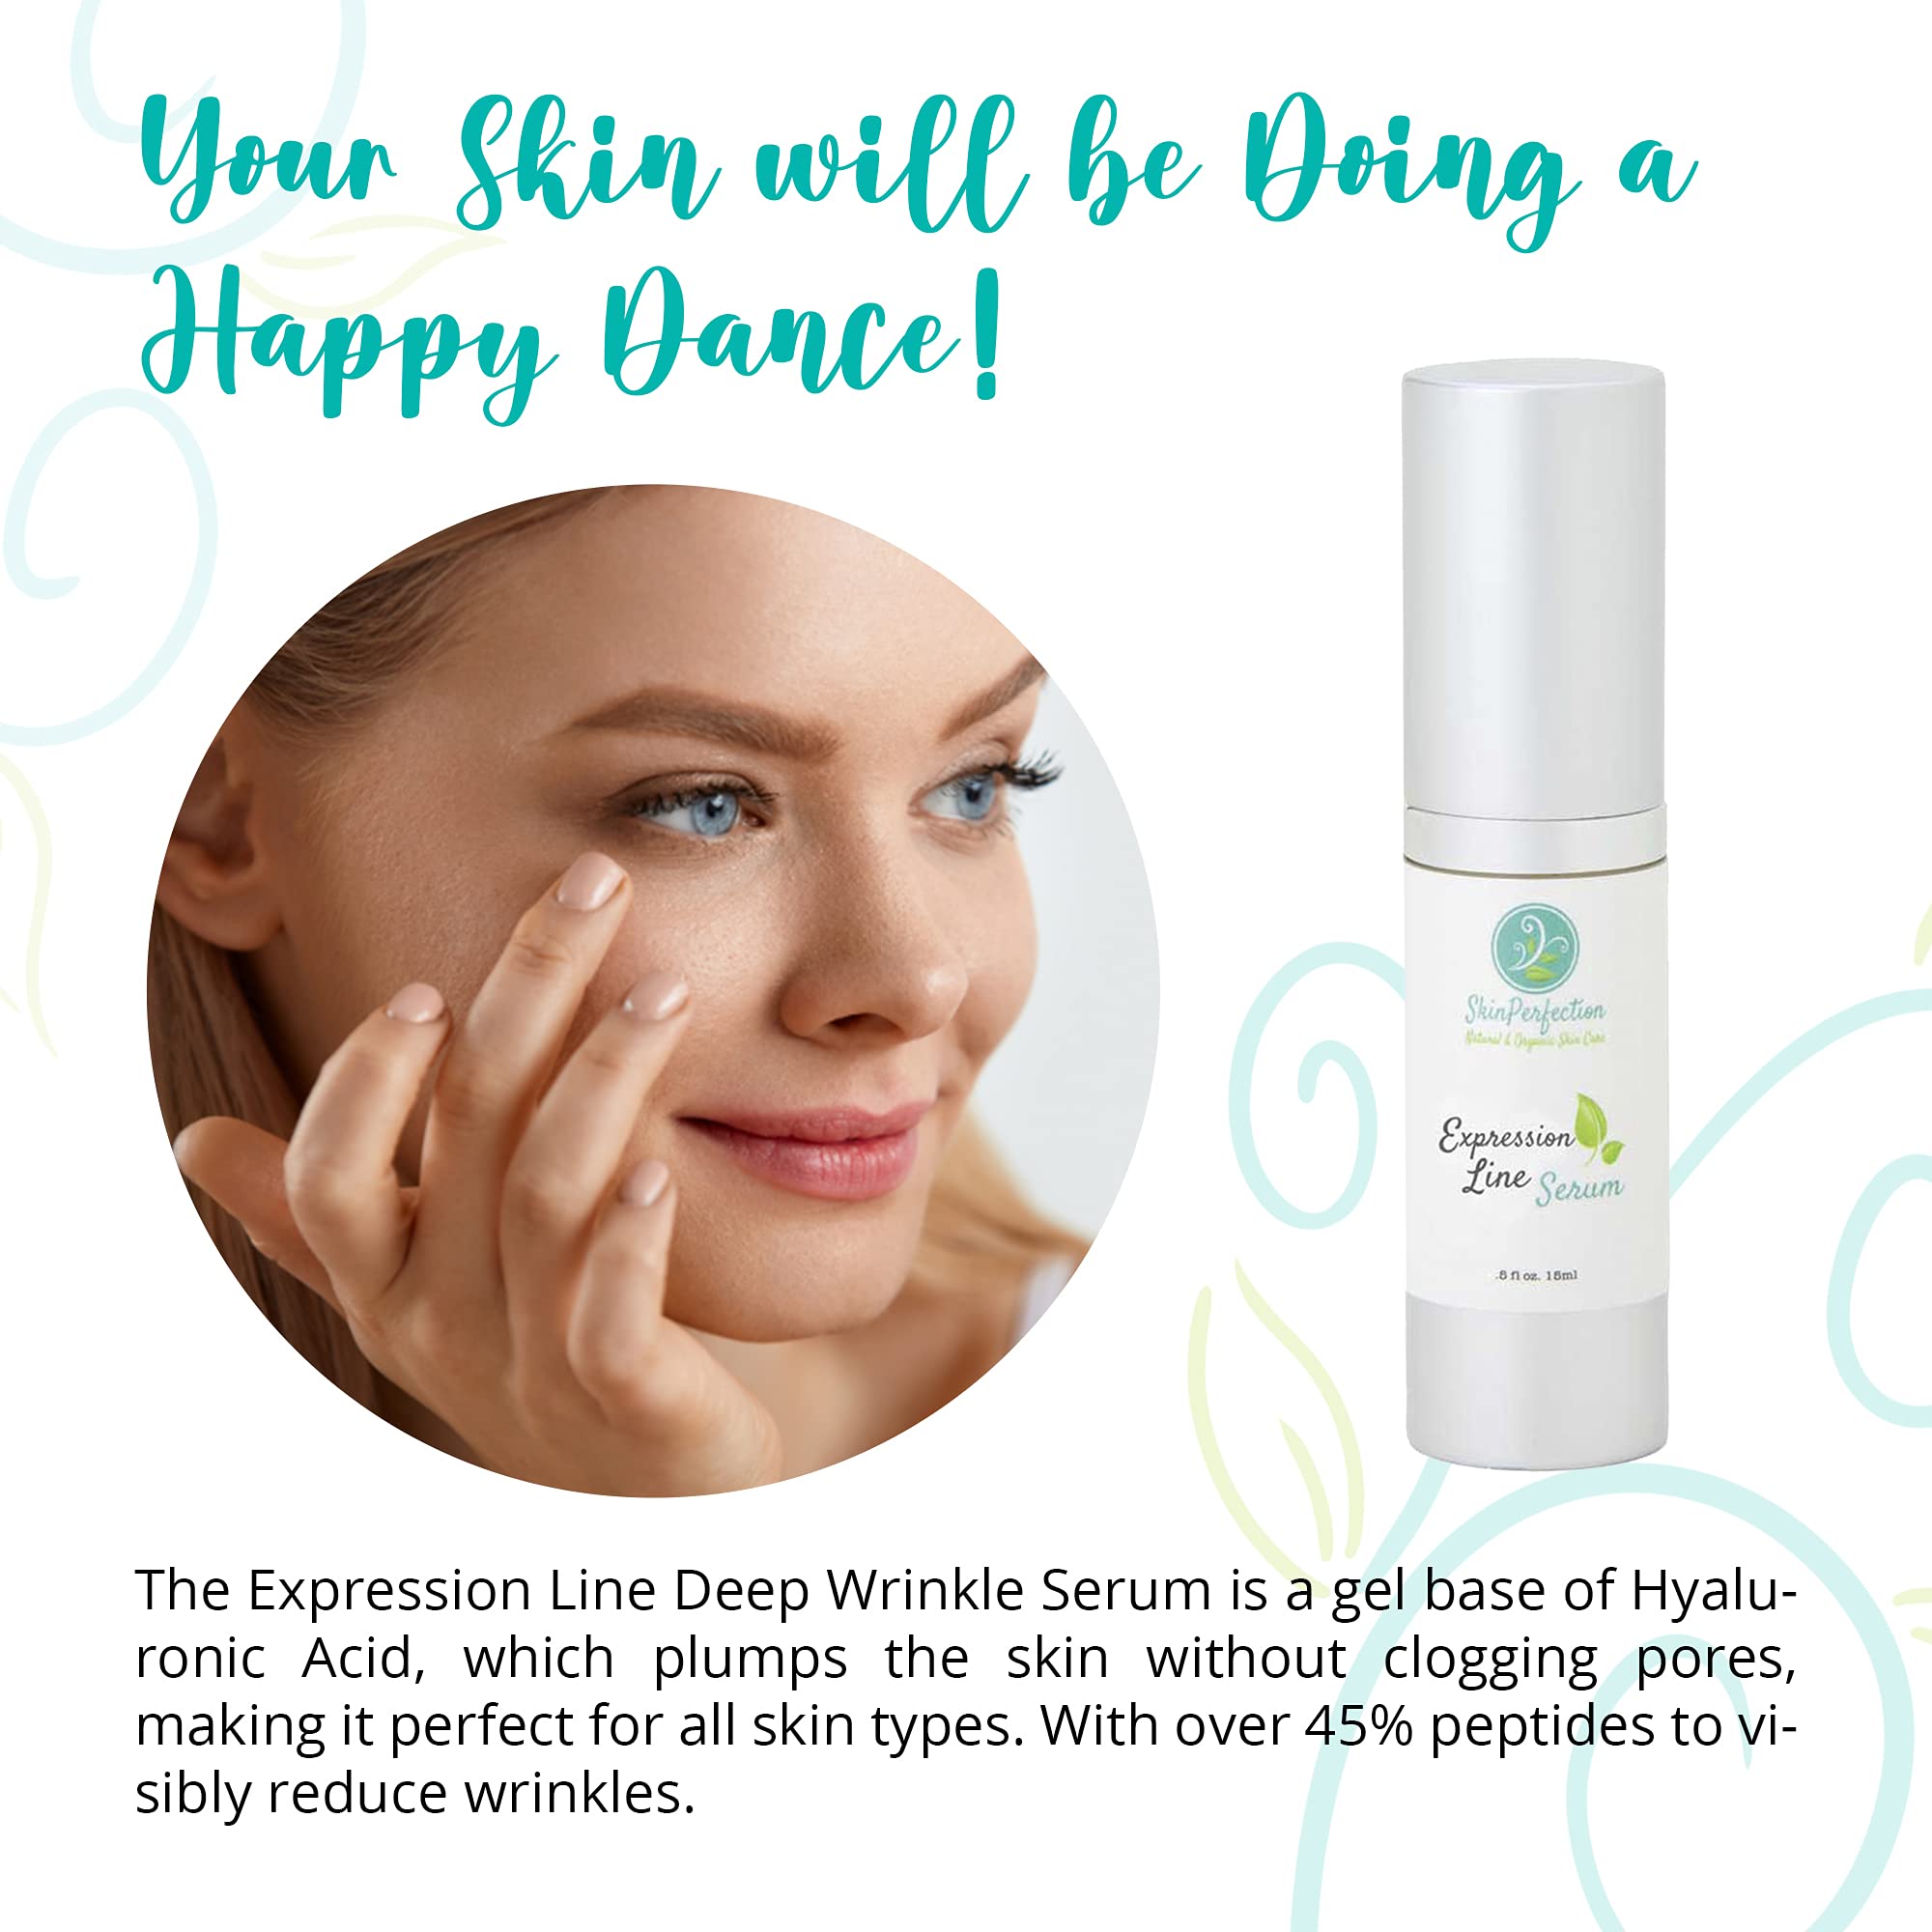 Expression Line Deep Wrinkle Anti-Aging Serum Syn-Ake Snap 8 Argireline Spin Trap Matrixyl Hyaluronic Acid Crow's Feet Forehead Marionette Vertical Lines Skin Perfection